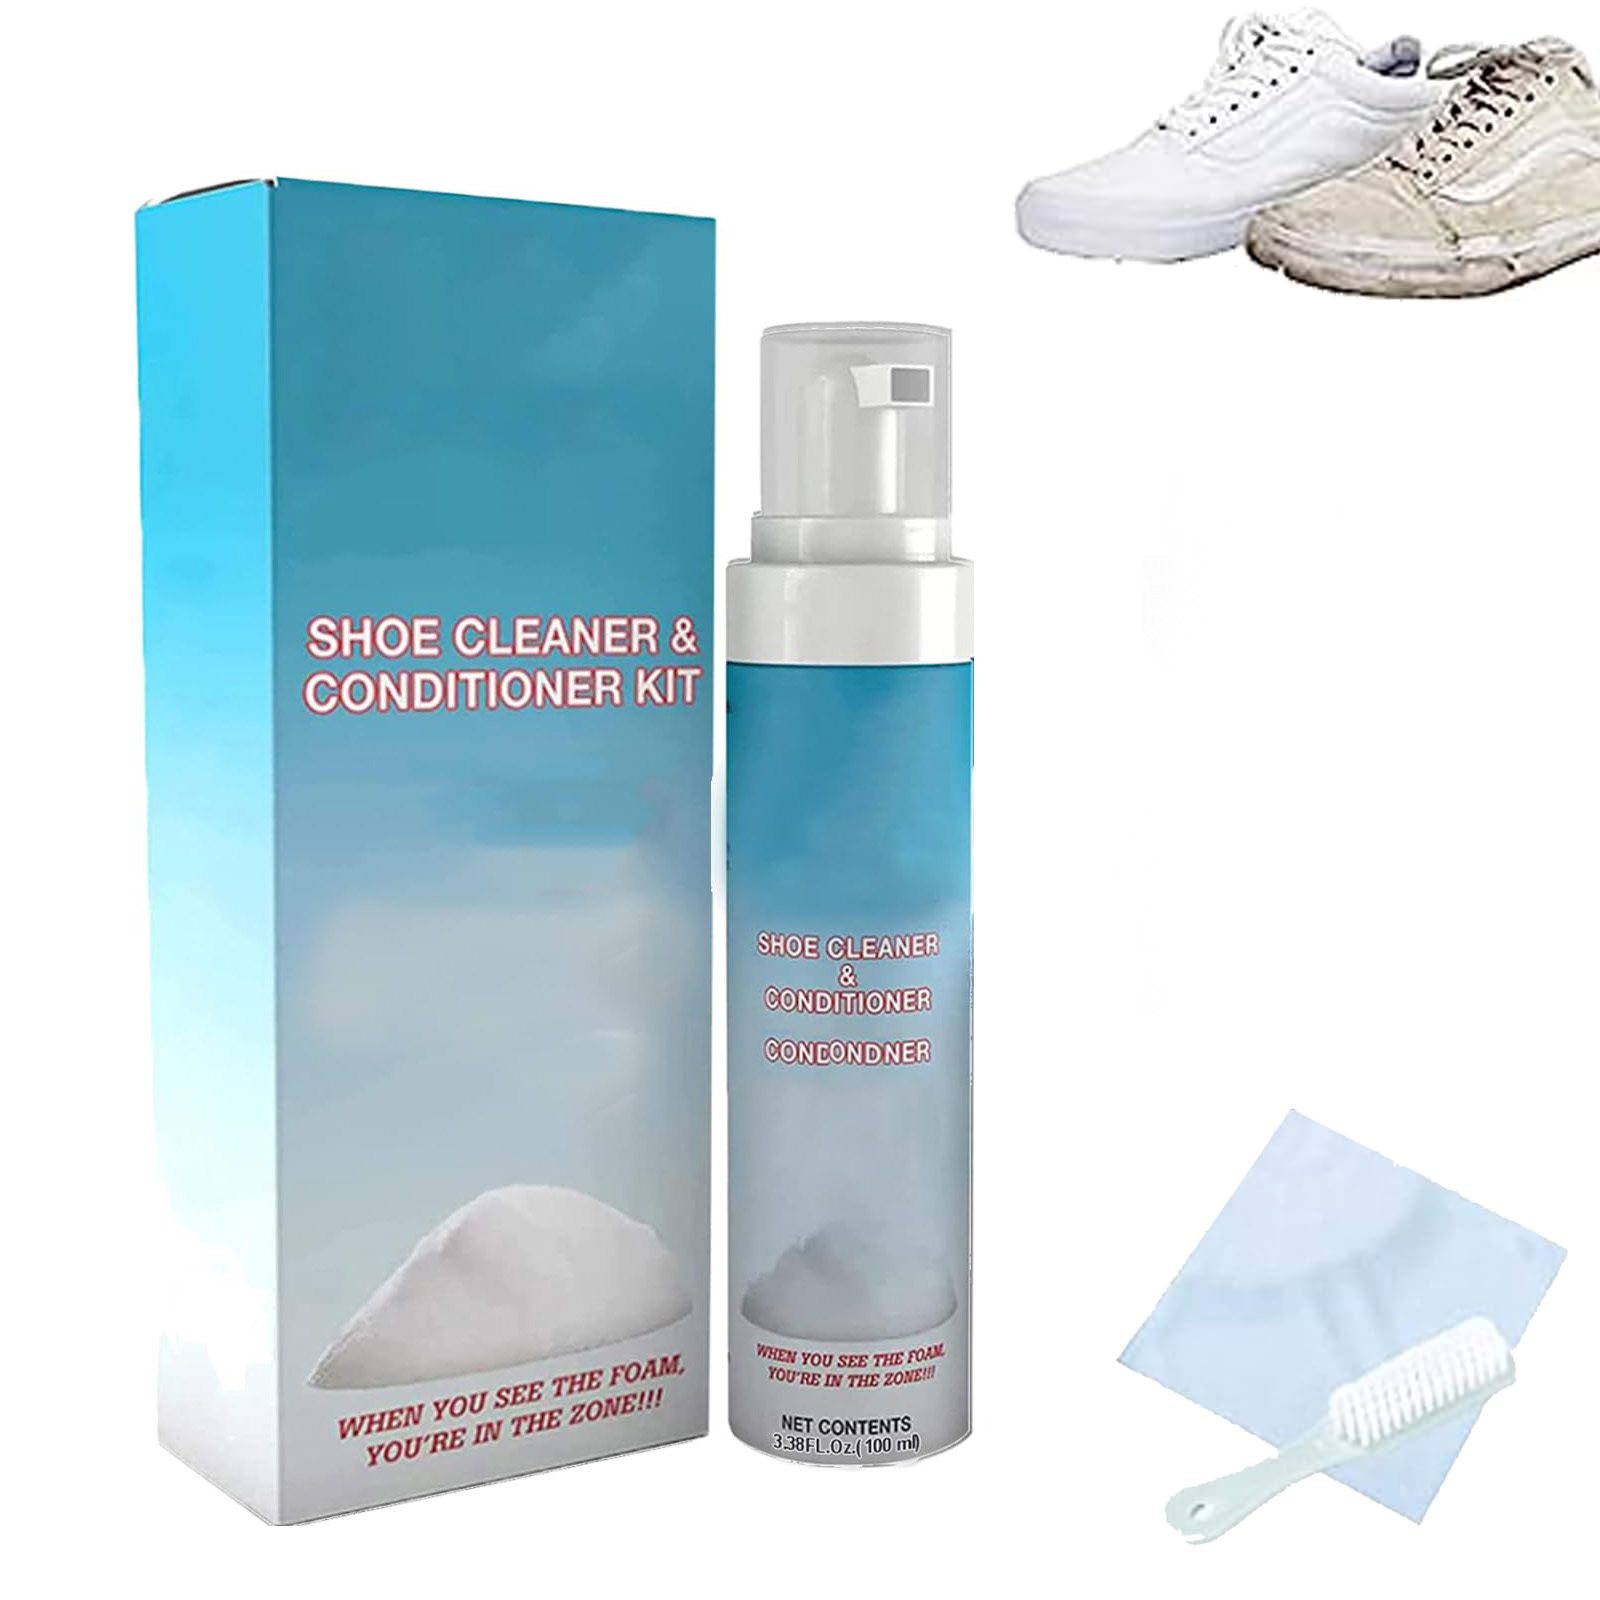 Xerdsx Shoe Cleaner & Conditioner Kit, FC150 Shoe Cleaner Foam Kit